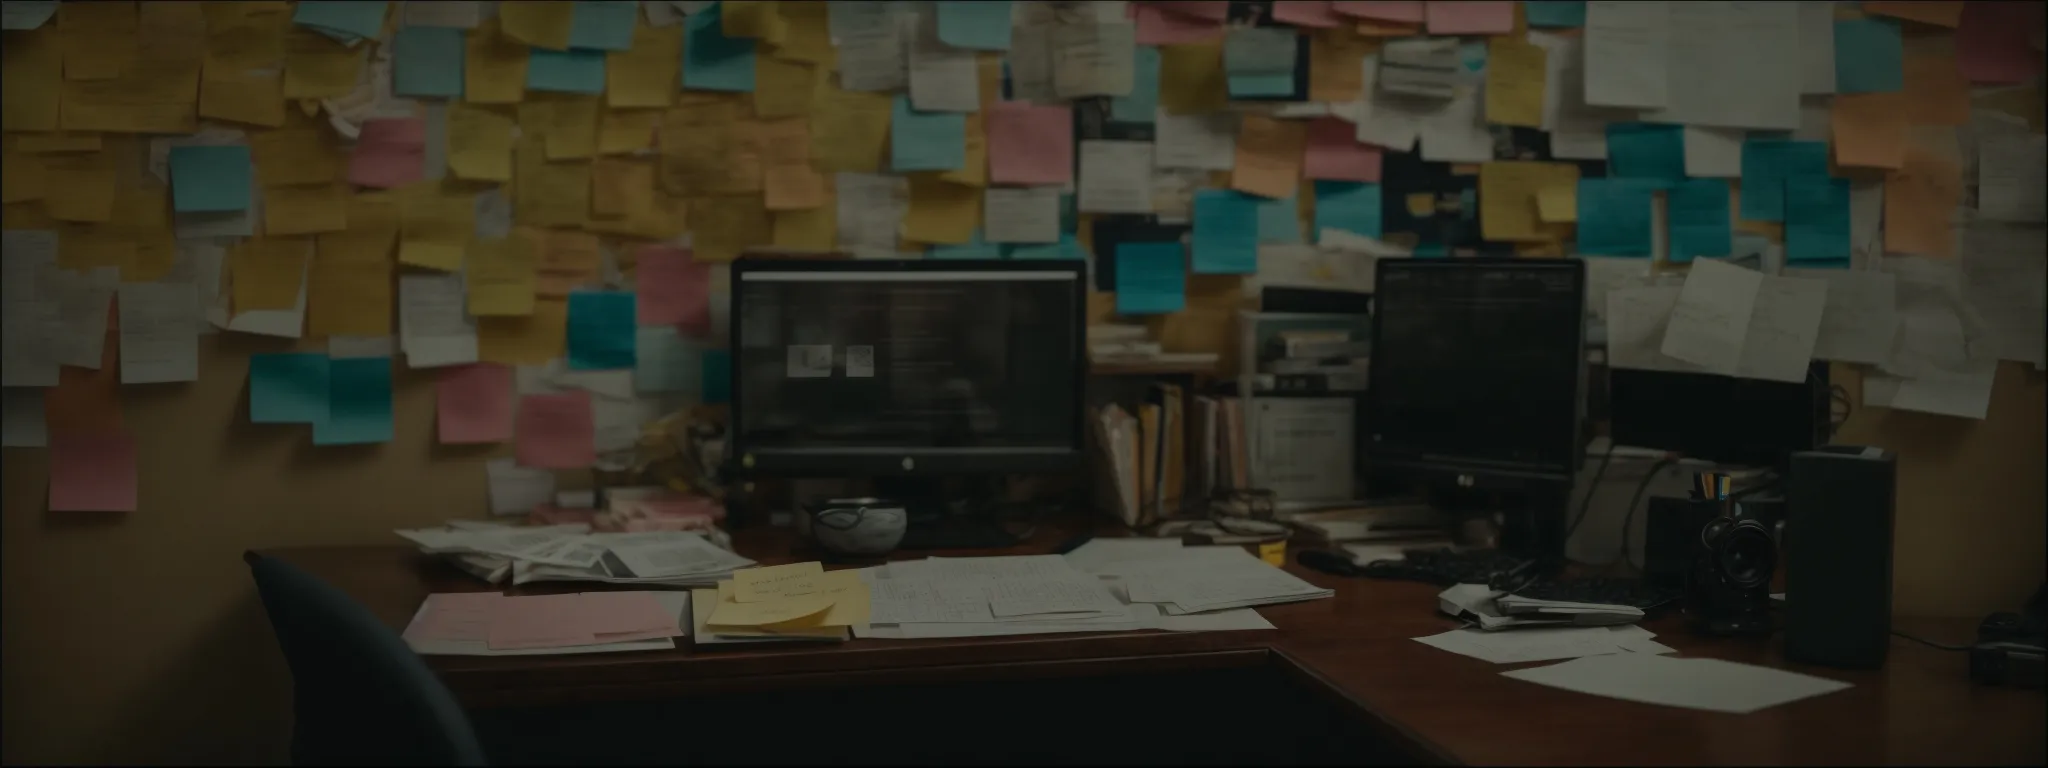 a person sitting at a desk, surrounded by sticky notes, books, and a computer screen displaying a search engine results page.